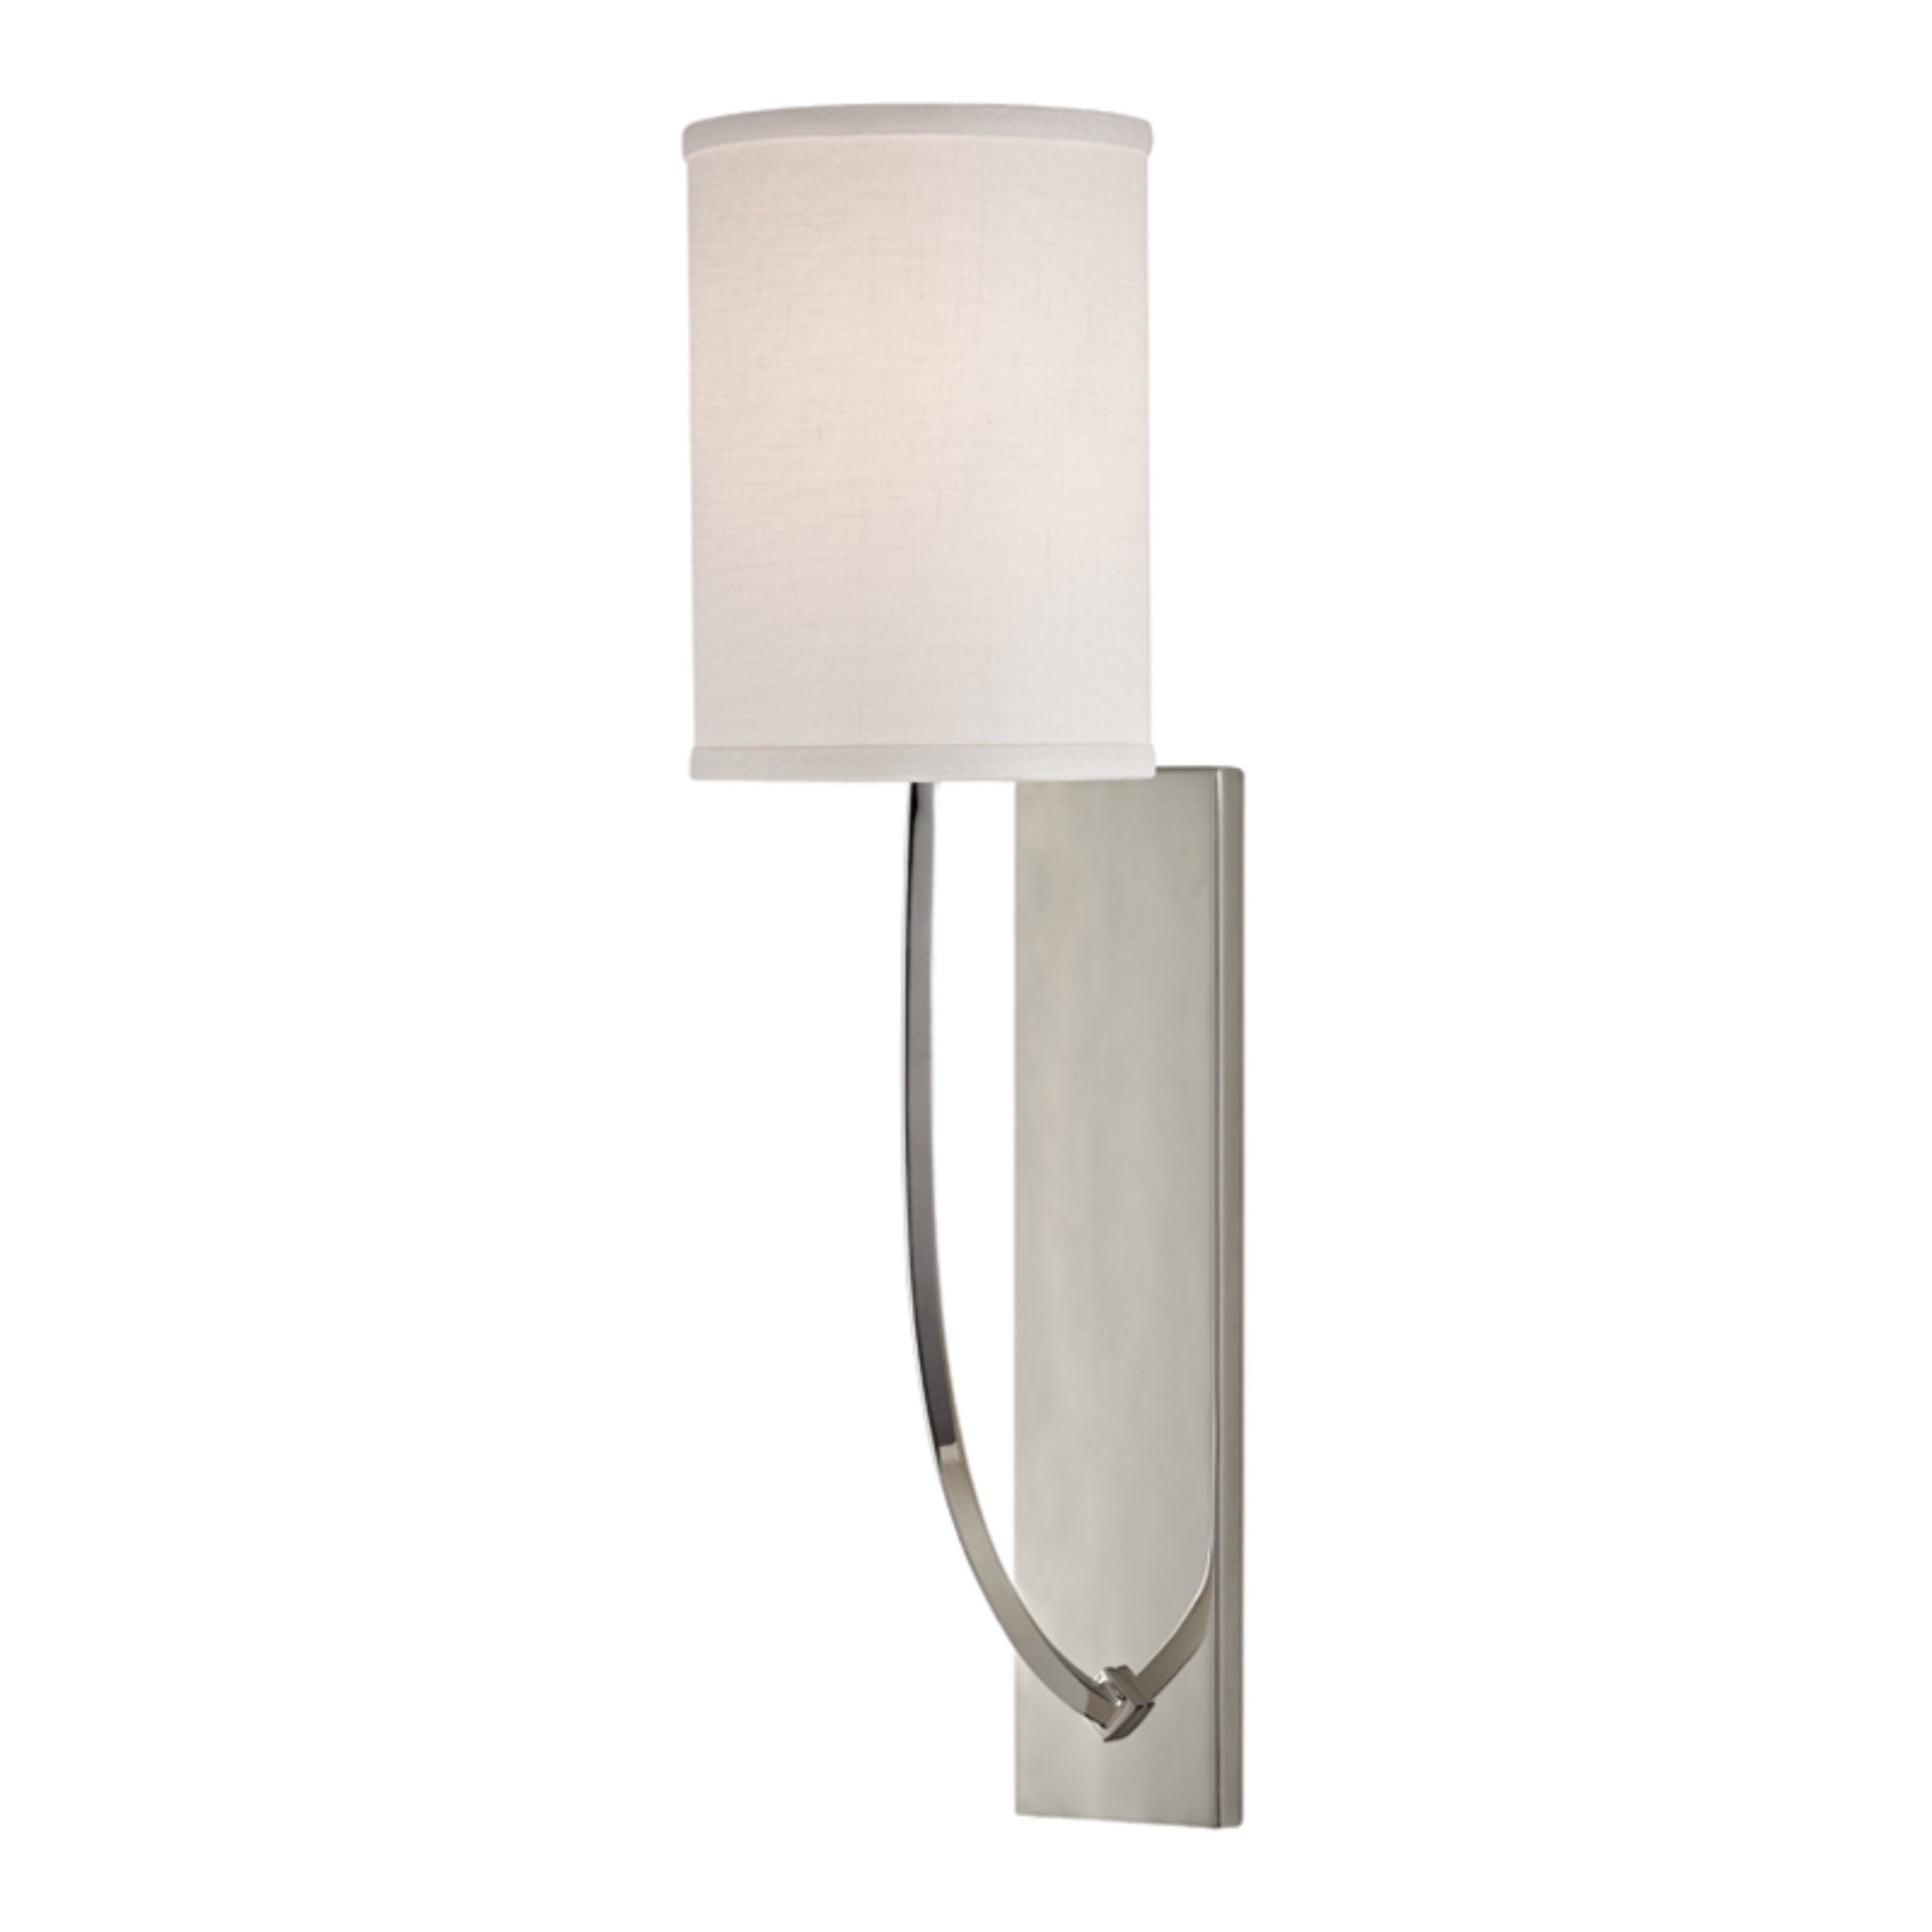 Colton 1 Light Wall Sconce in Polished Nickel